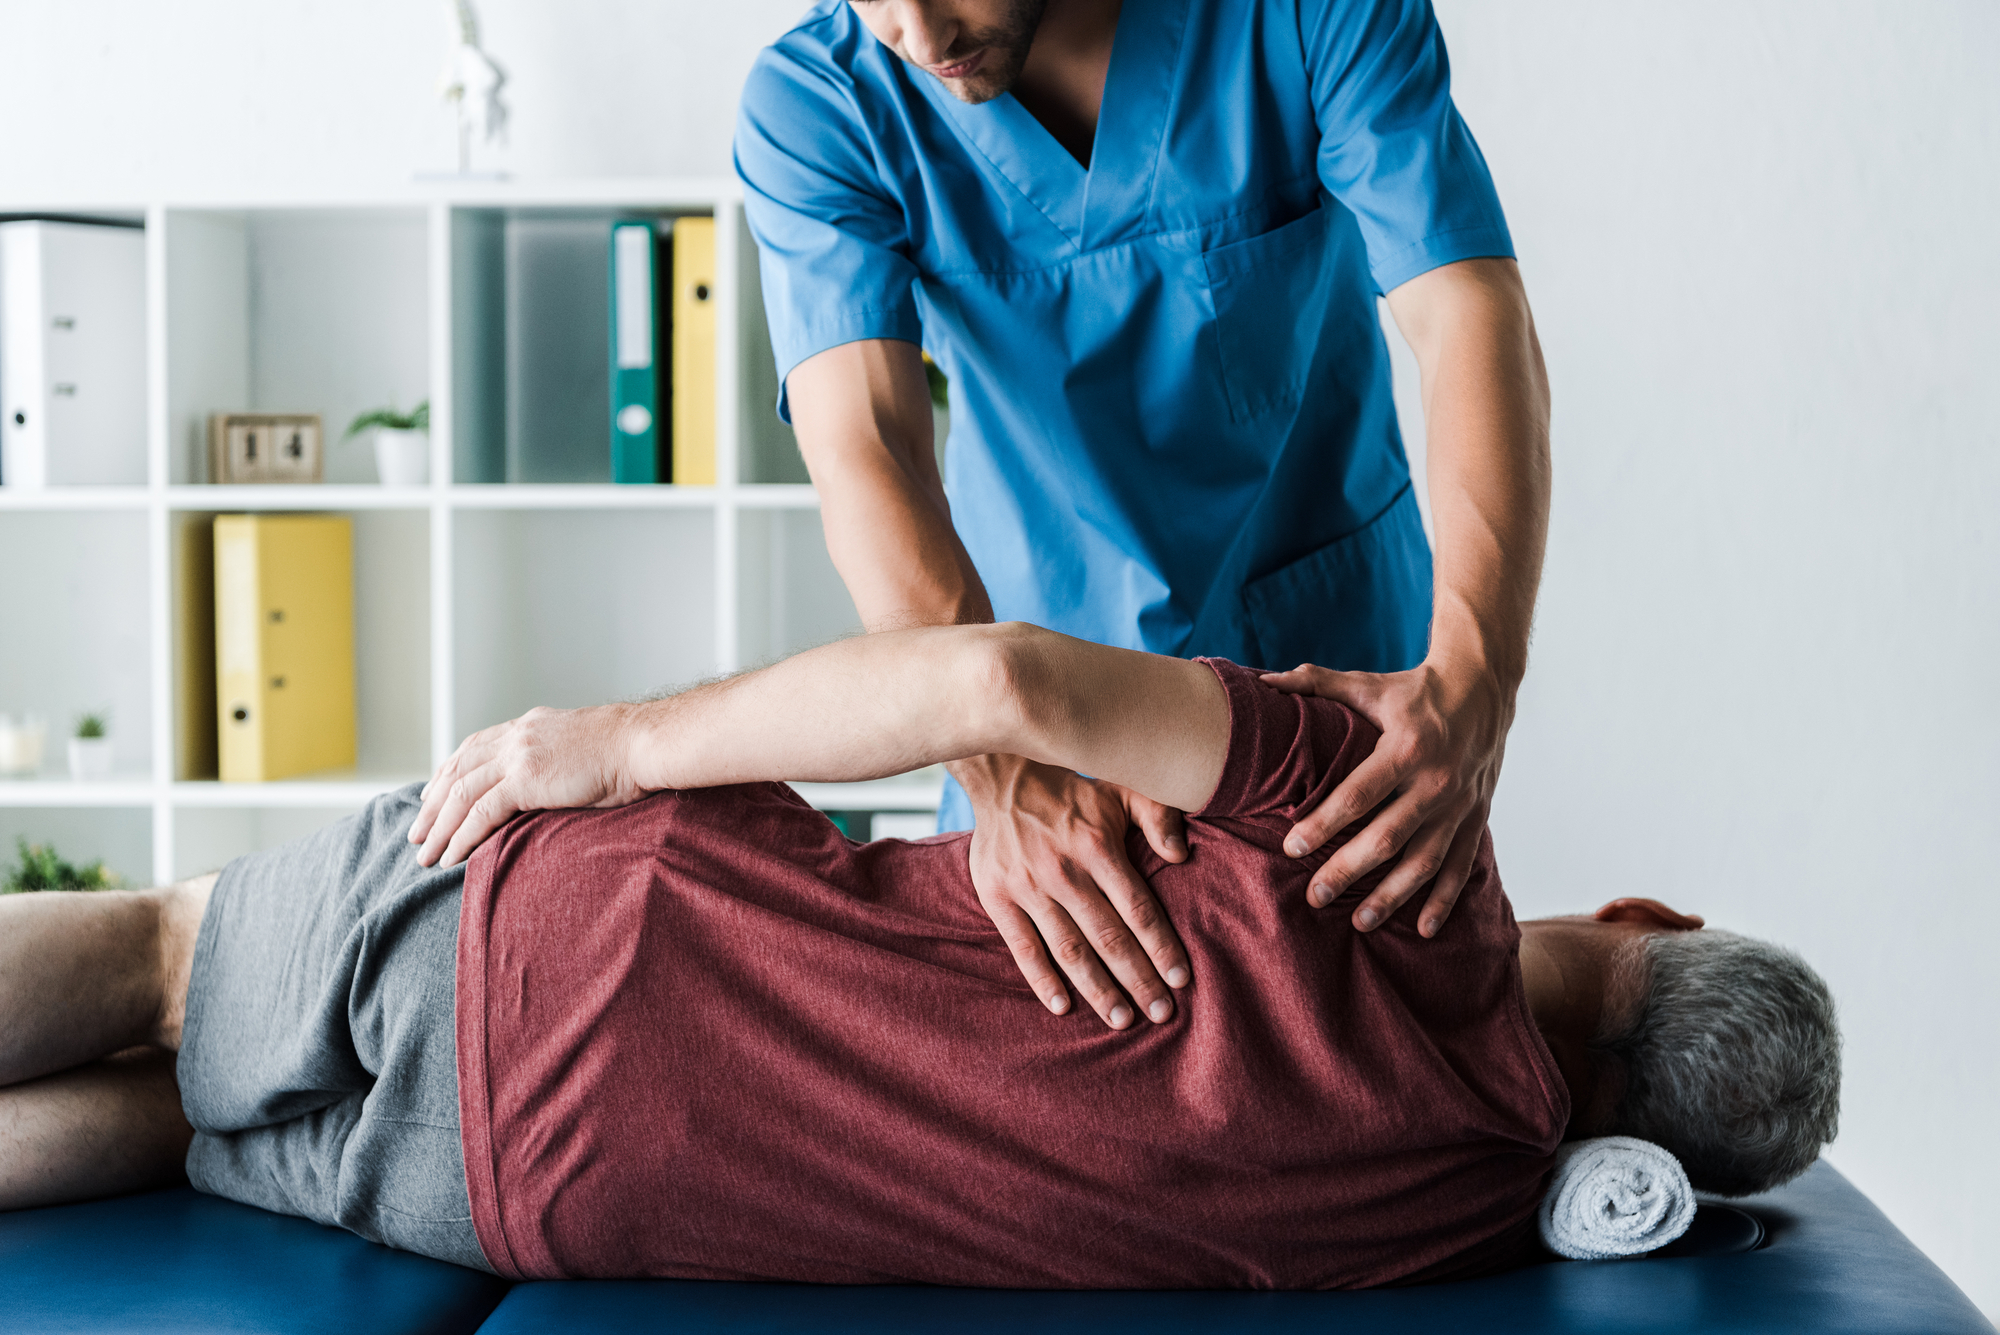 Why Should I See A Chiropractor?